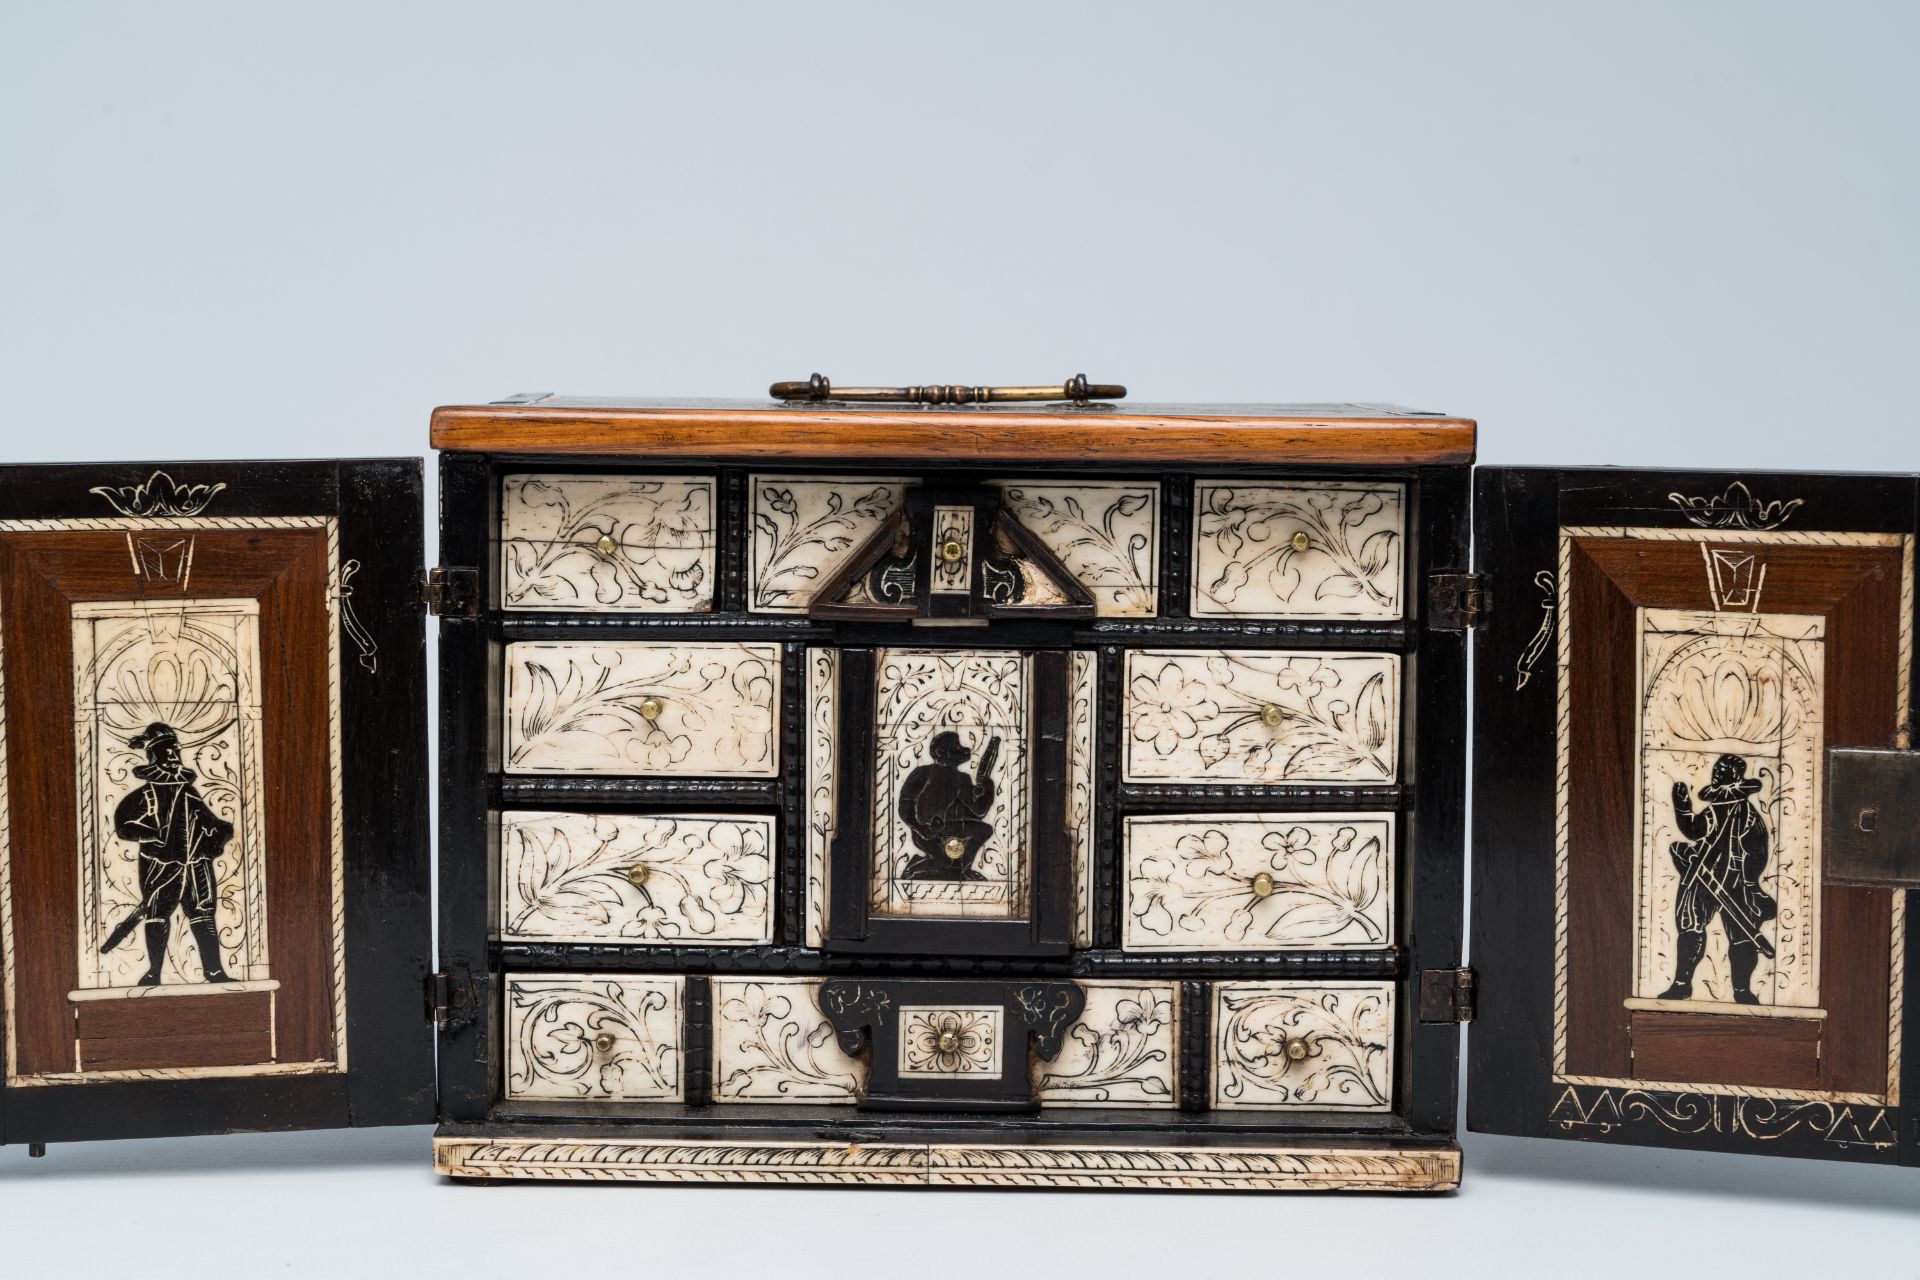 An elegant wood bone mounted miniature cabinet with figures and floral design, 17th/18th C. - Image 10 of 13